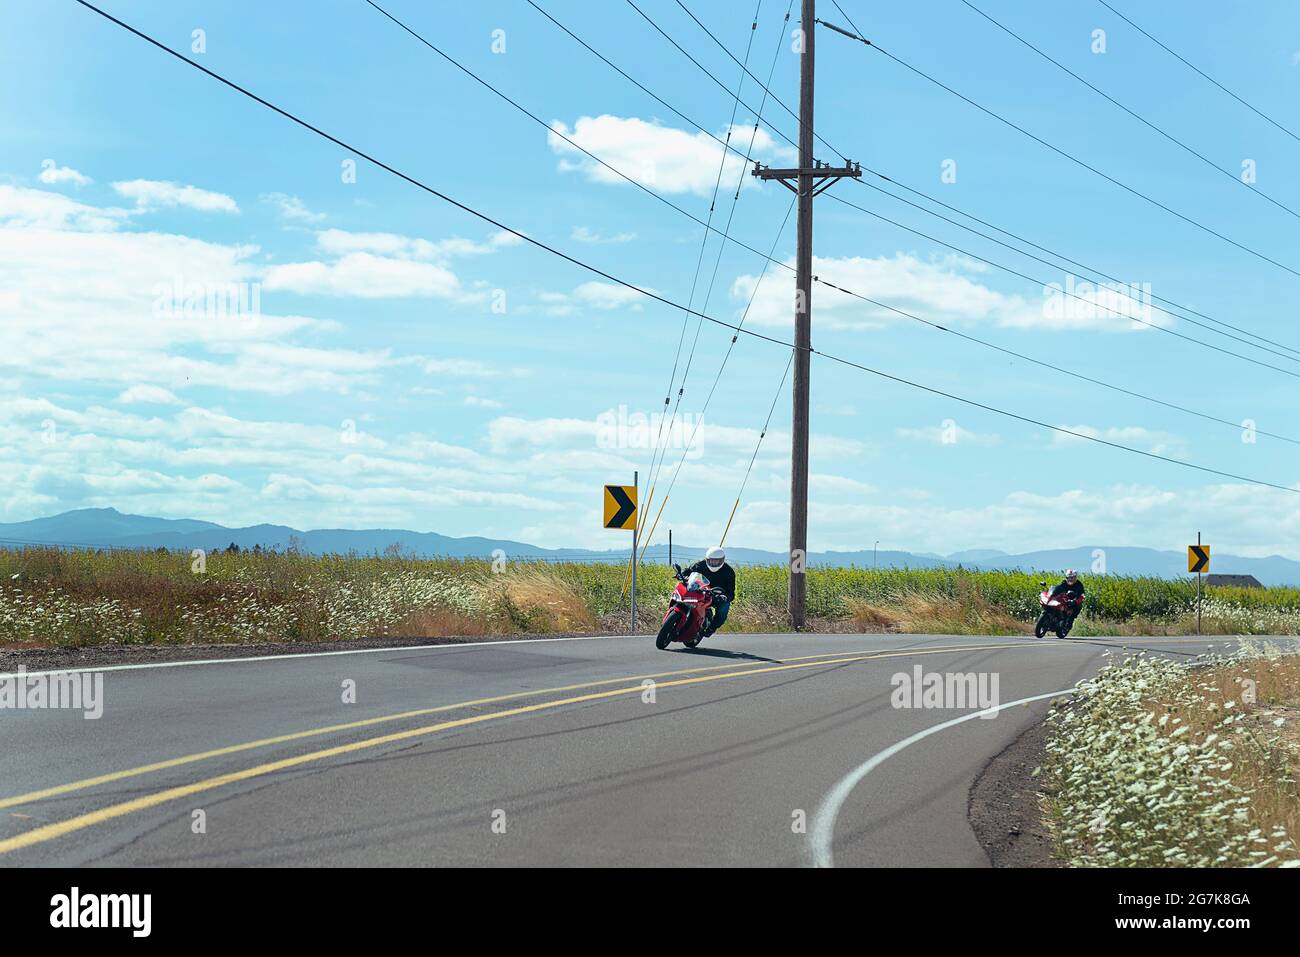 Motorcycles taking a curve on a country road. Stock Photo